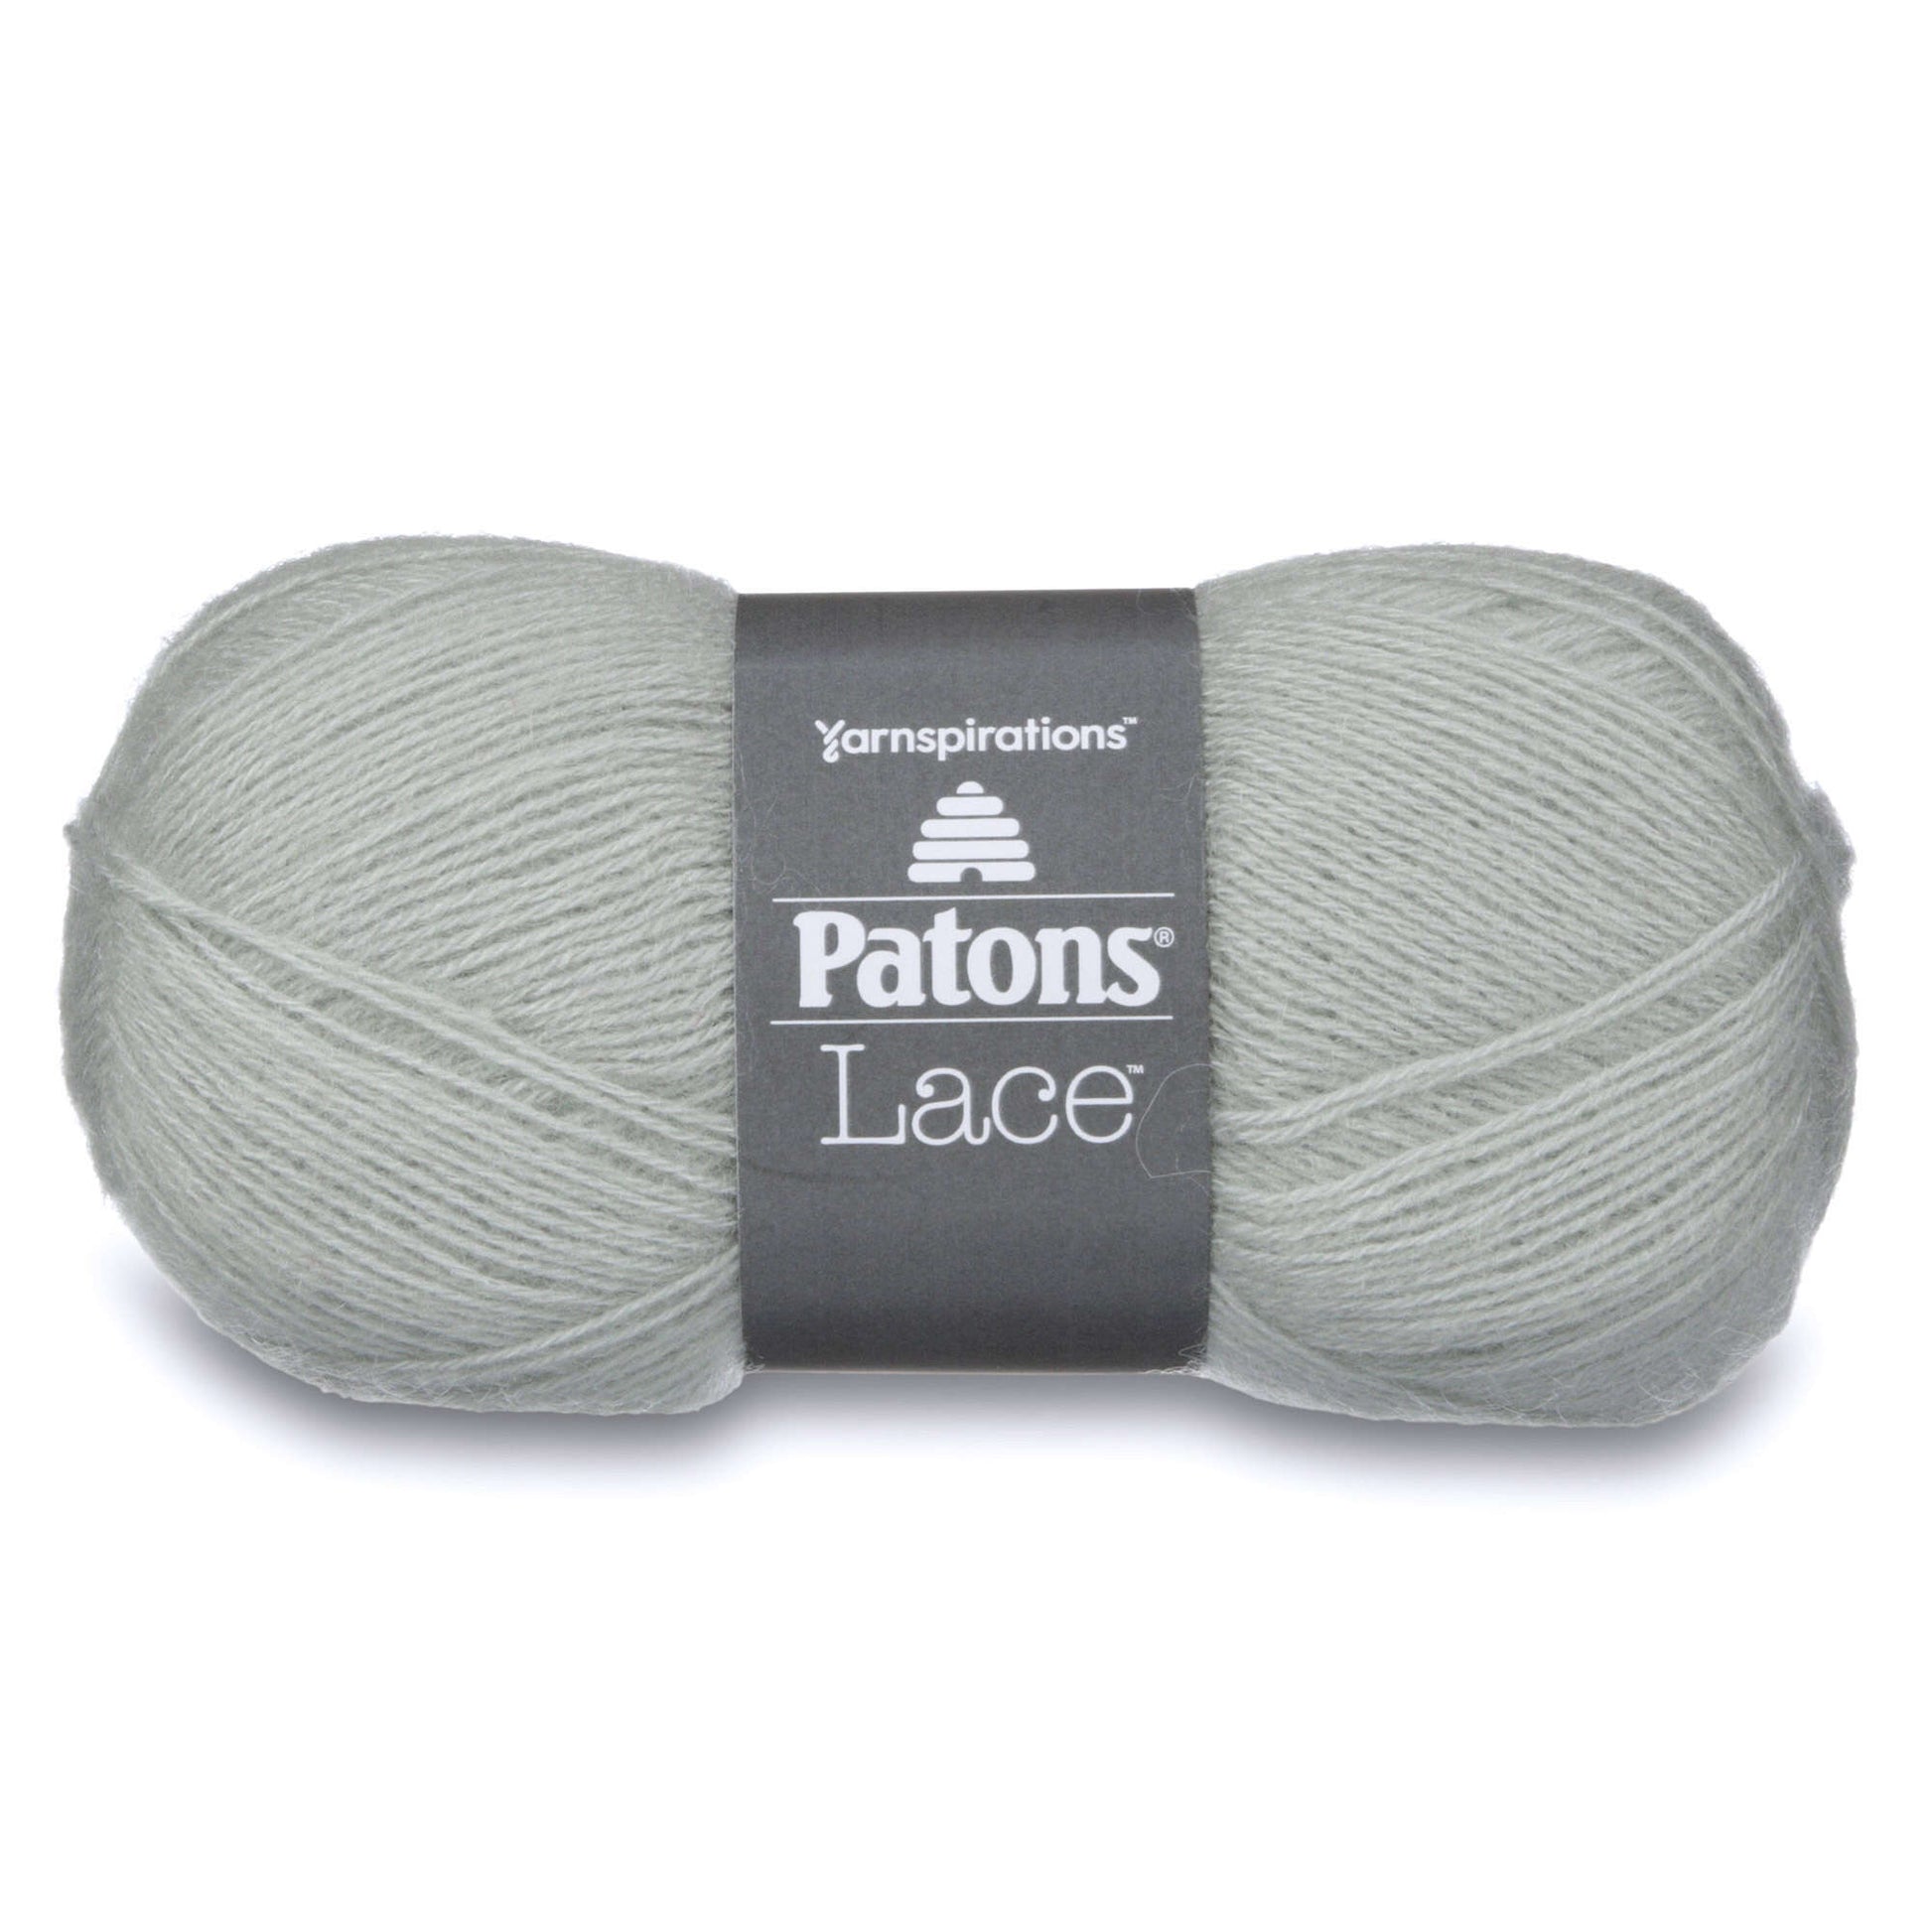 Patons Lace Yarn - Discontinued Dove Gray